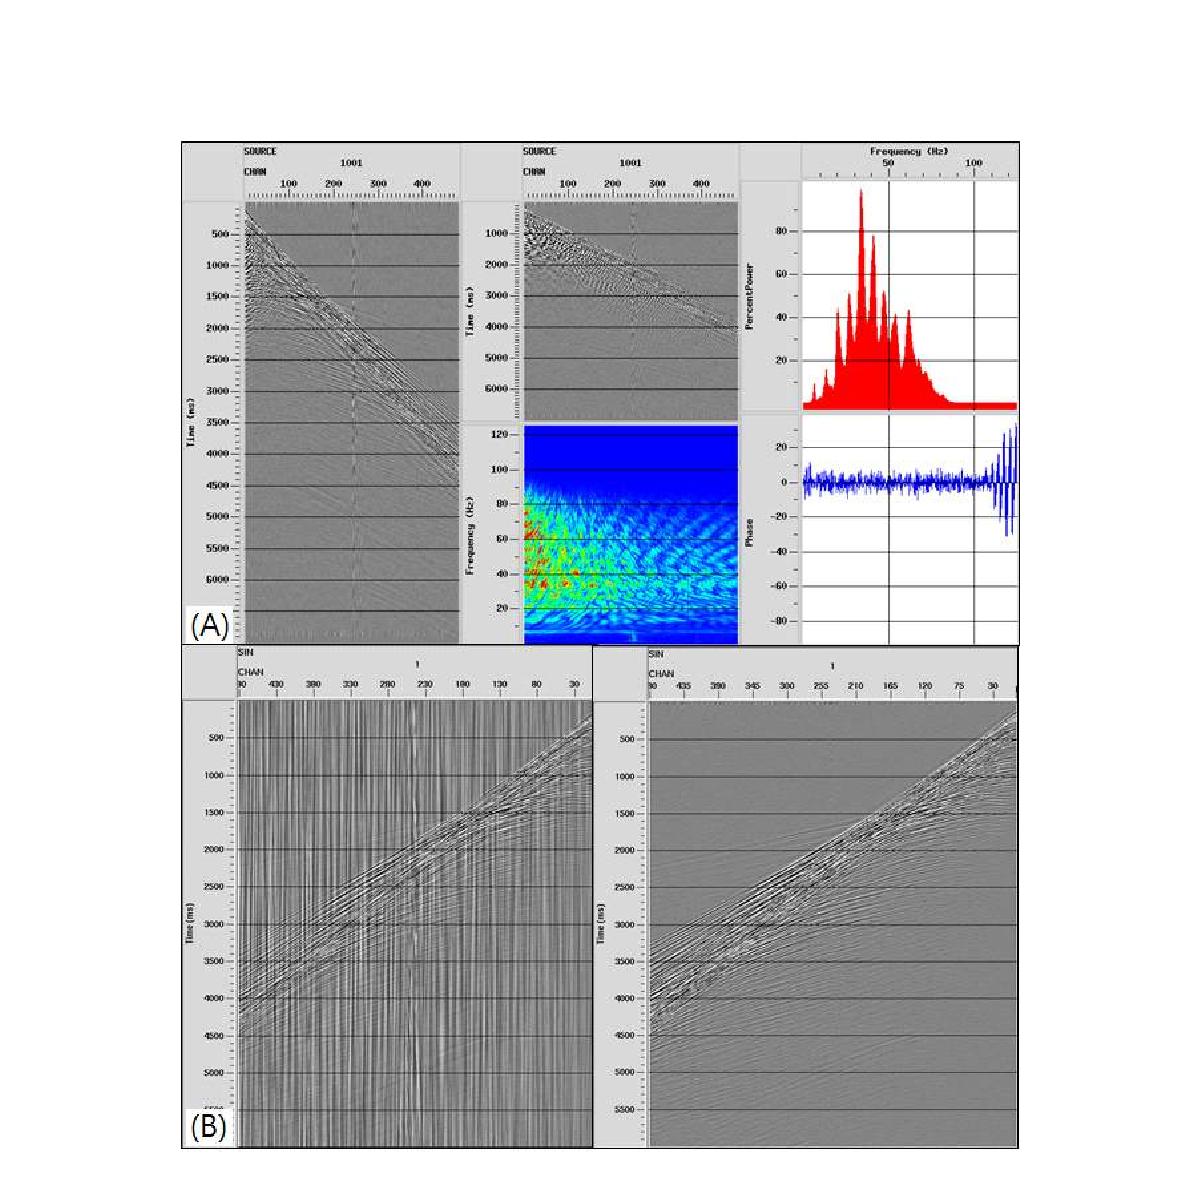 (a) Amplitude spectrum analysis for bandpass filter (b) Shot gather before and after applying bandpass filter.